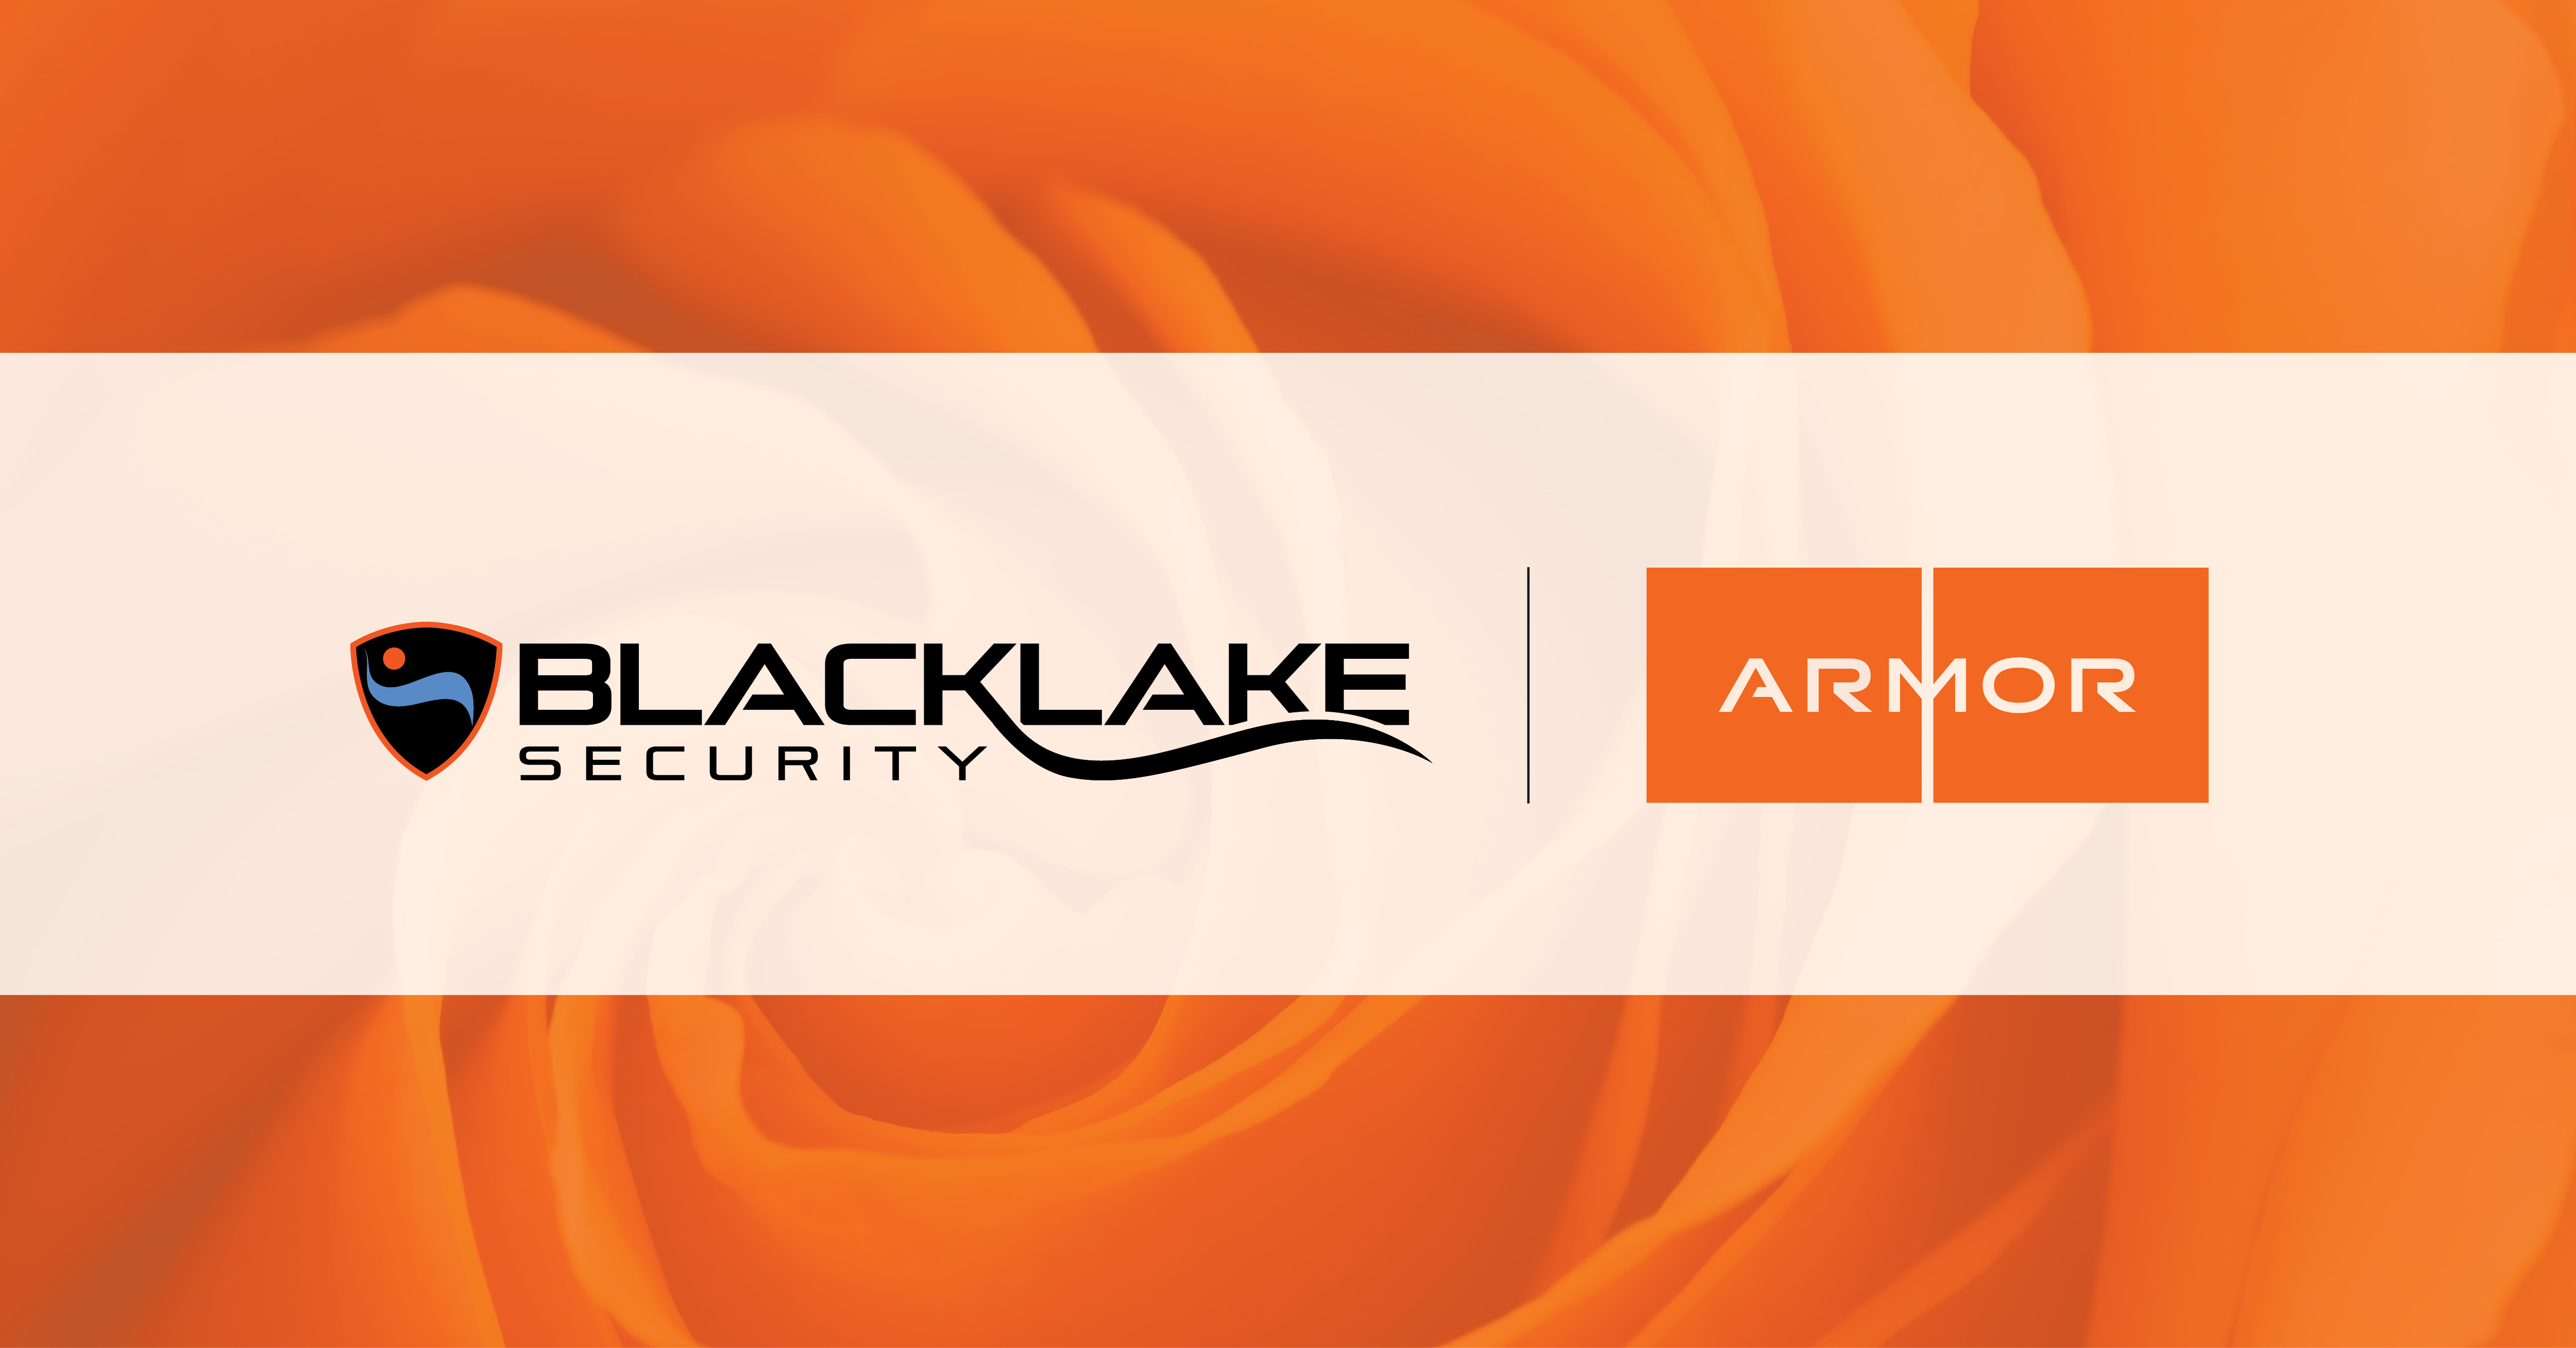 MSSP BlackLake Security partners with Armor to secure its customers' cloud data 